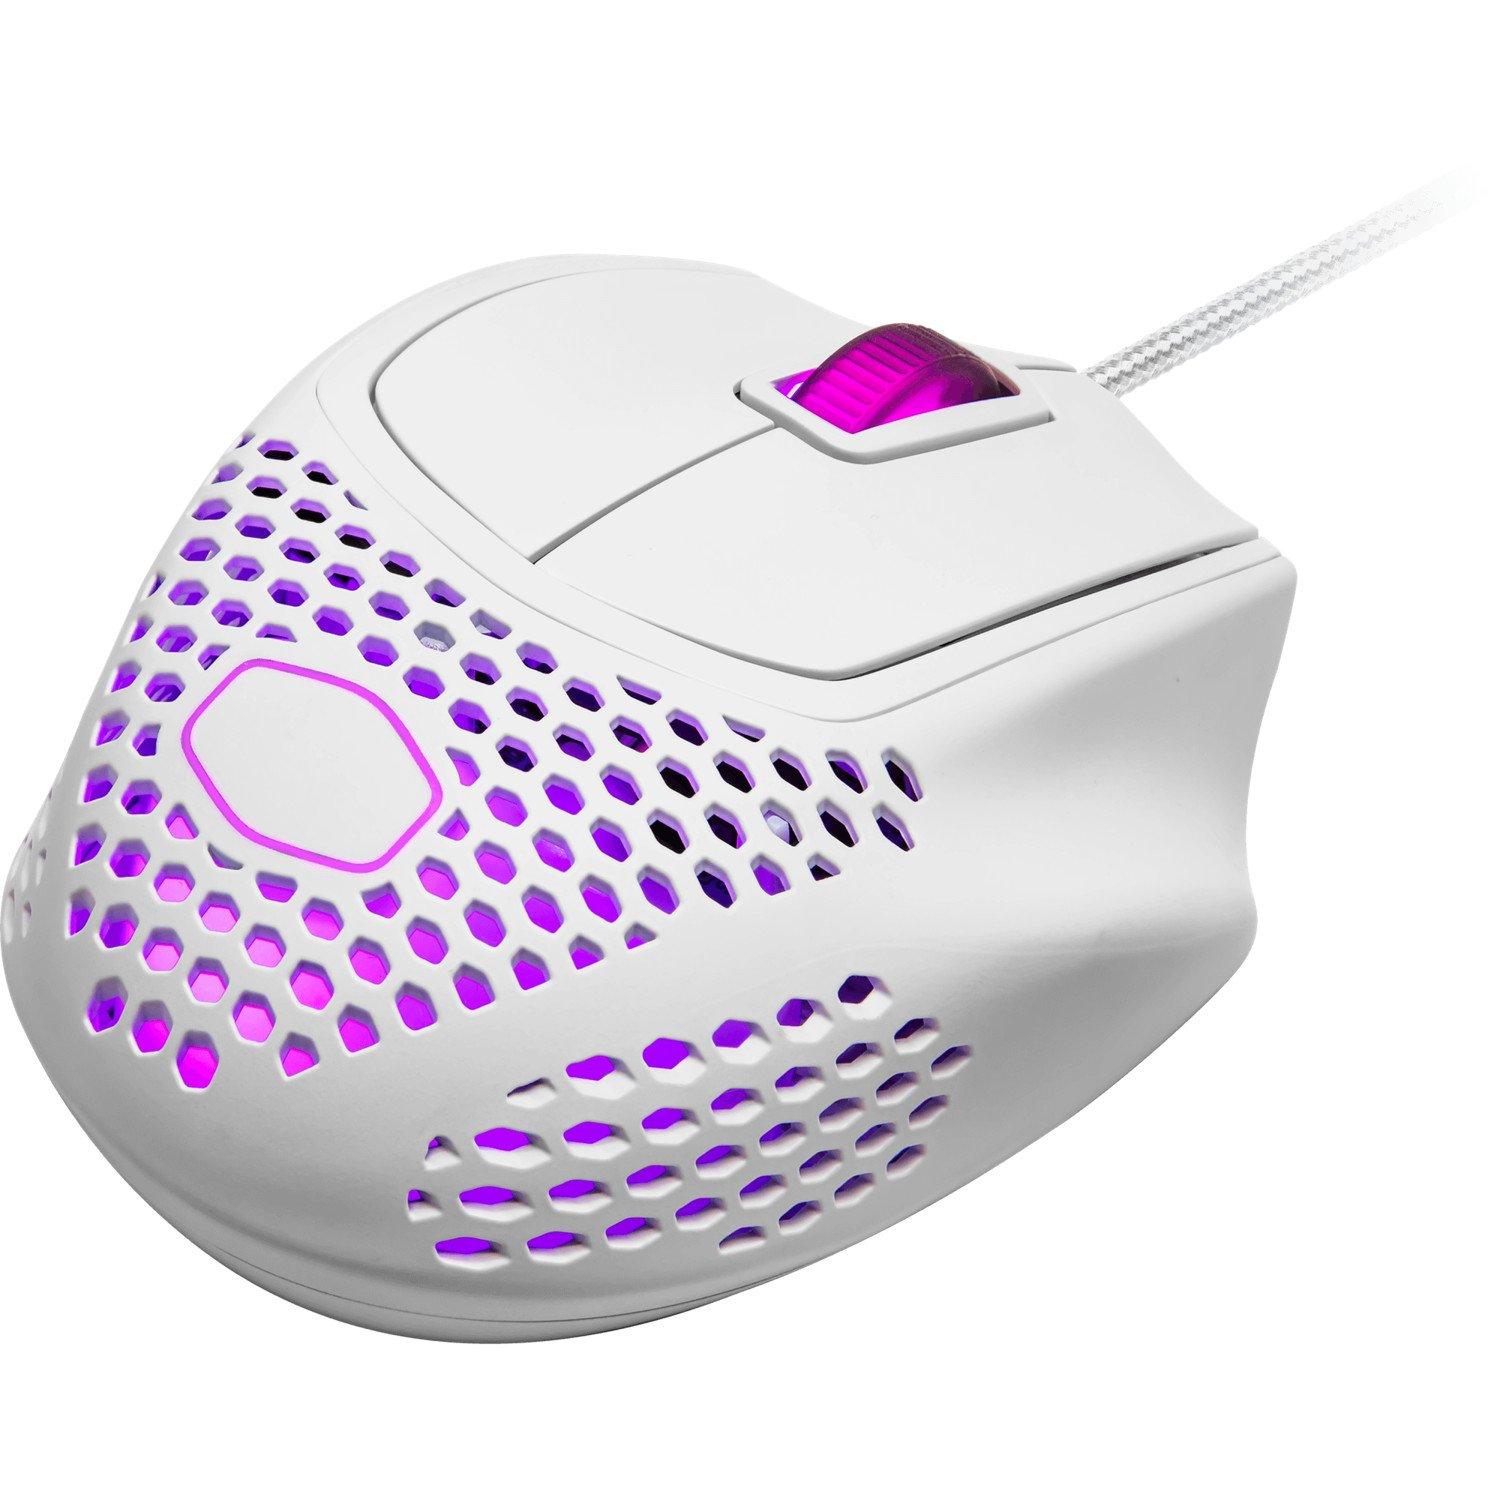 list item 3 of 6 Cooler Master MM720 Gaming Mouse